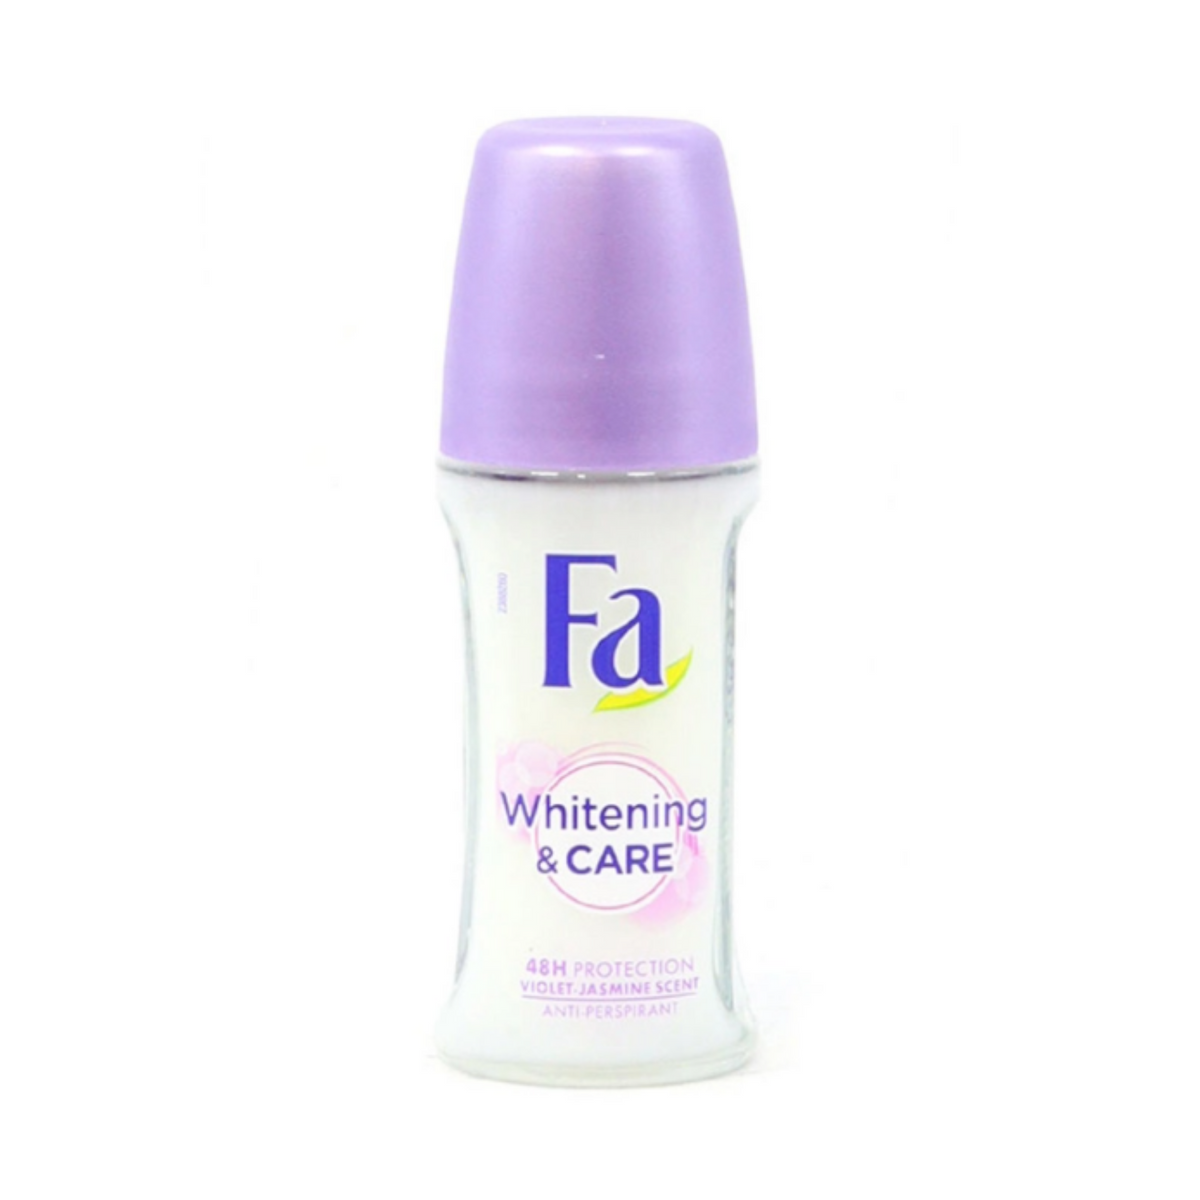 Primary image of Fa Whitening & Care Roll On Deodorant